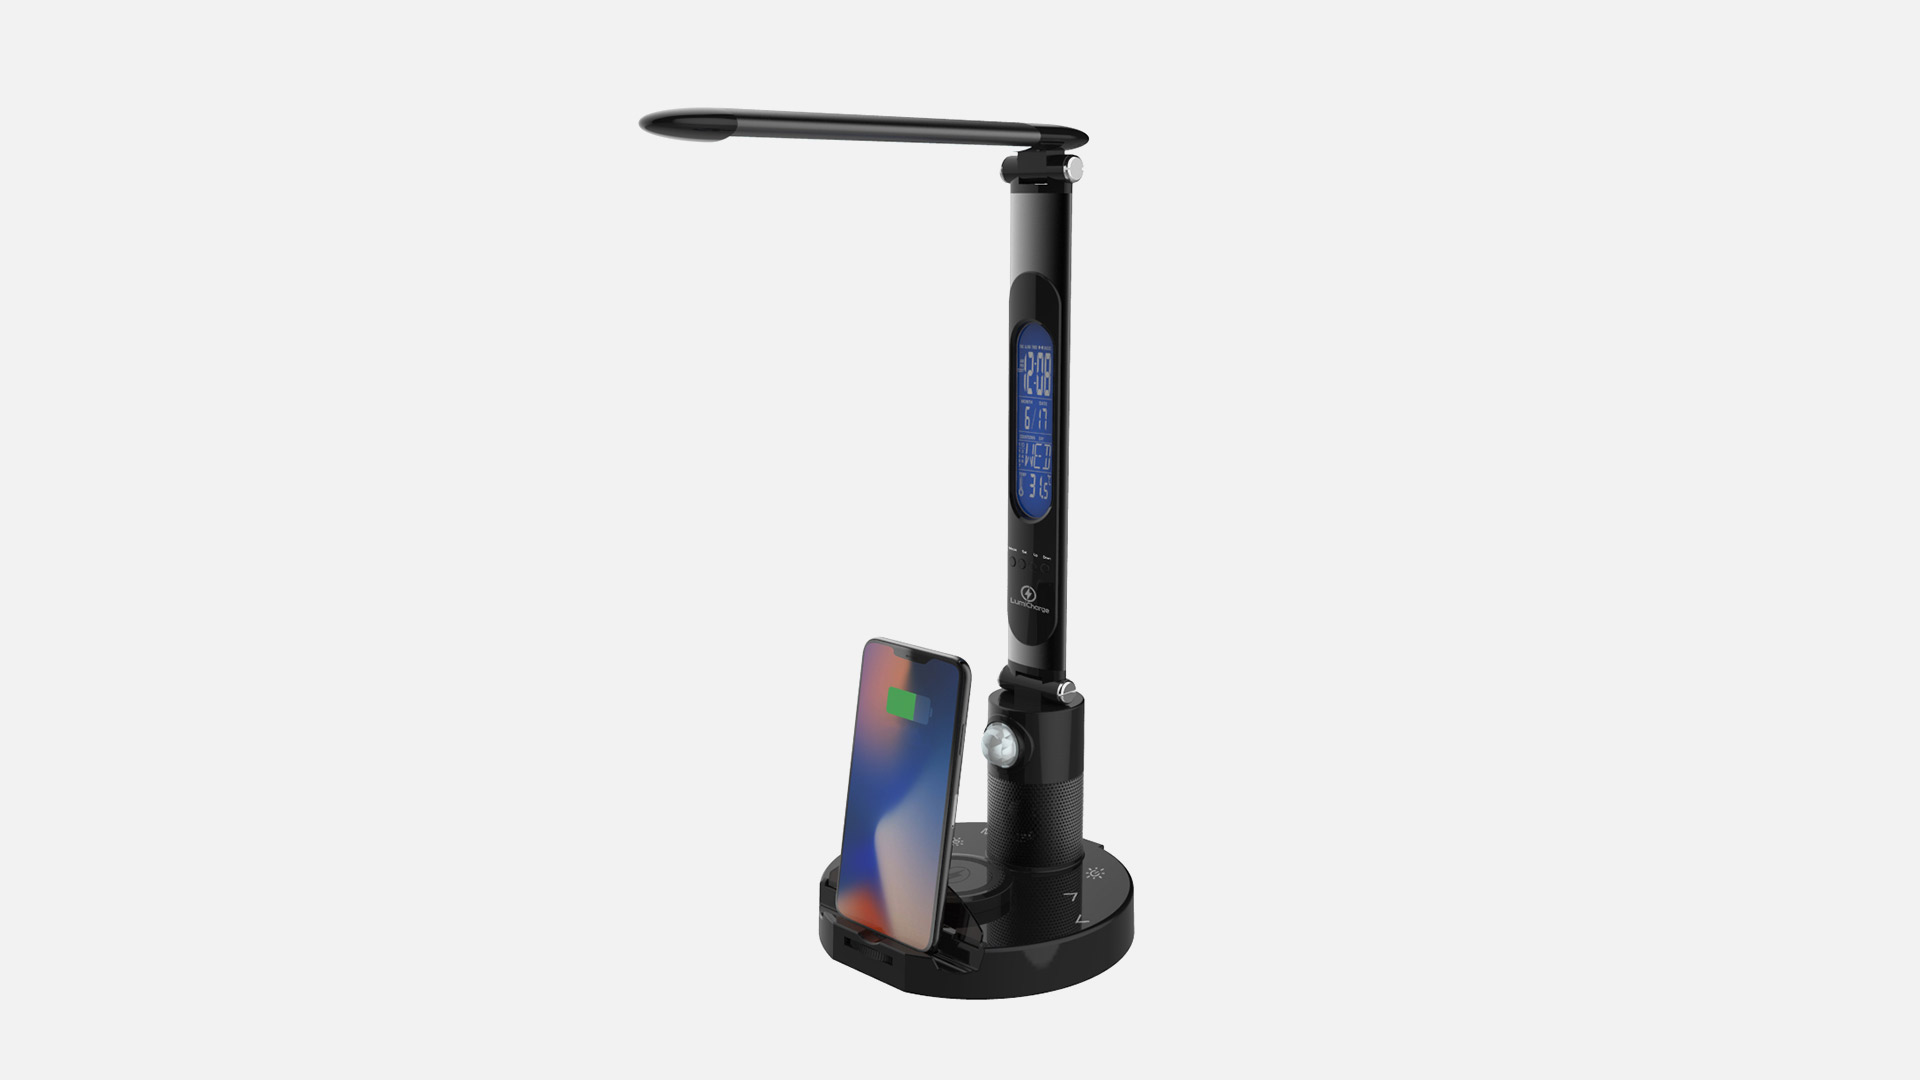 Lumicharge LED Desk Lamp with Smartphone Control